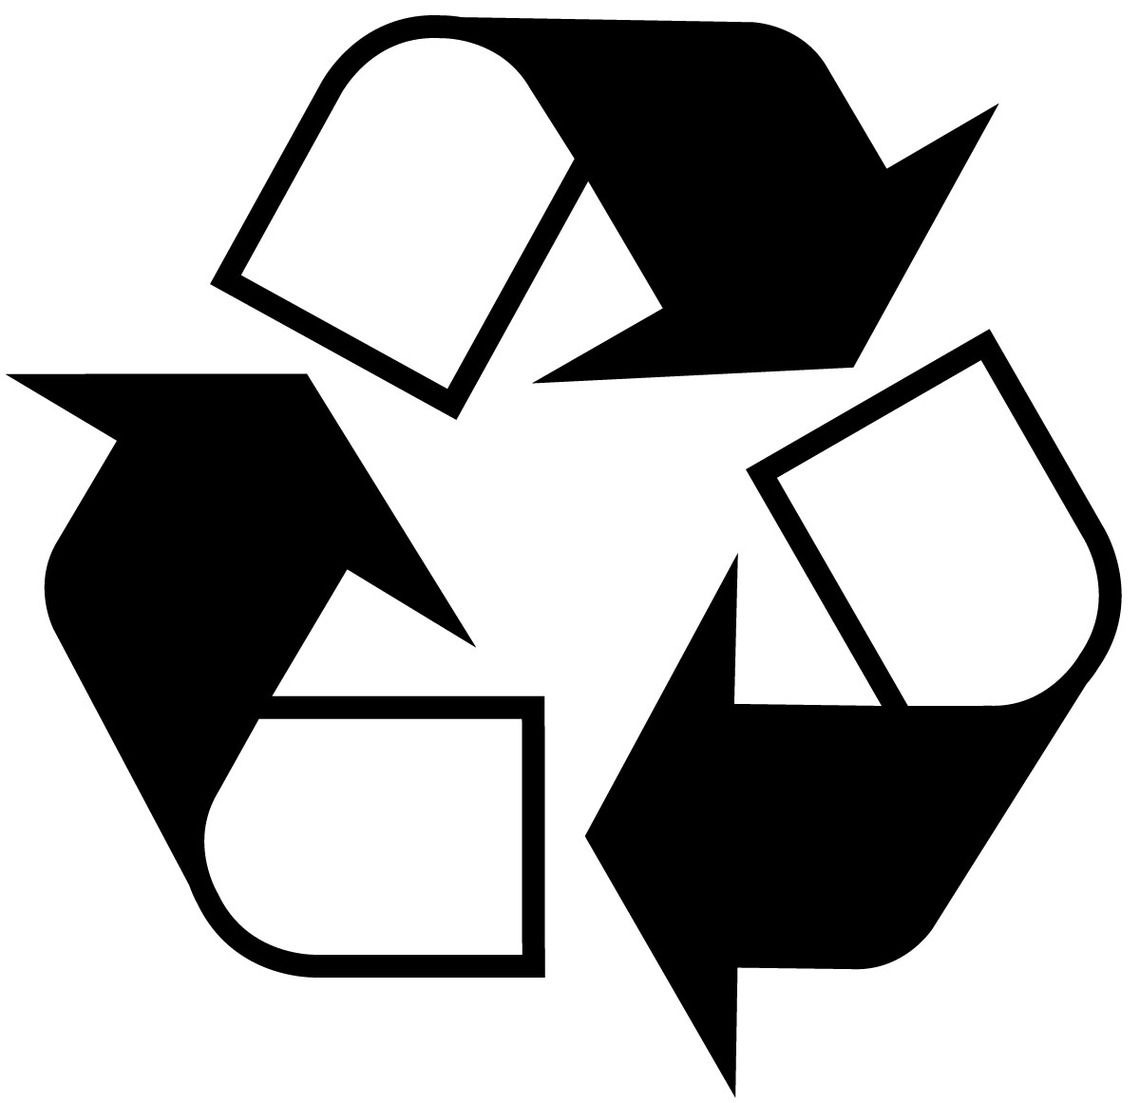 Black Recycle Sign Clipart - Free to use Clip Art Resource